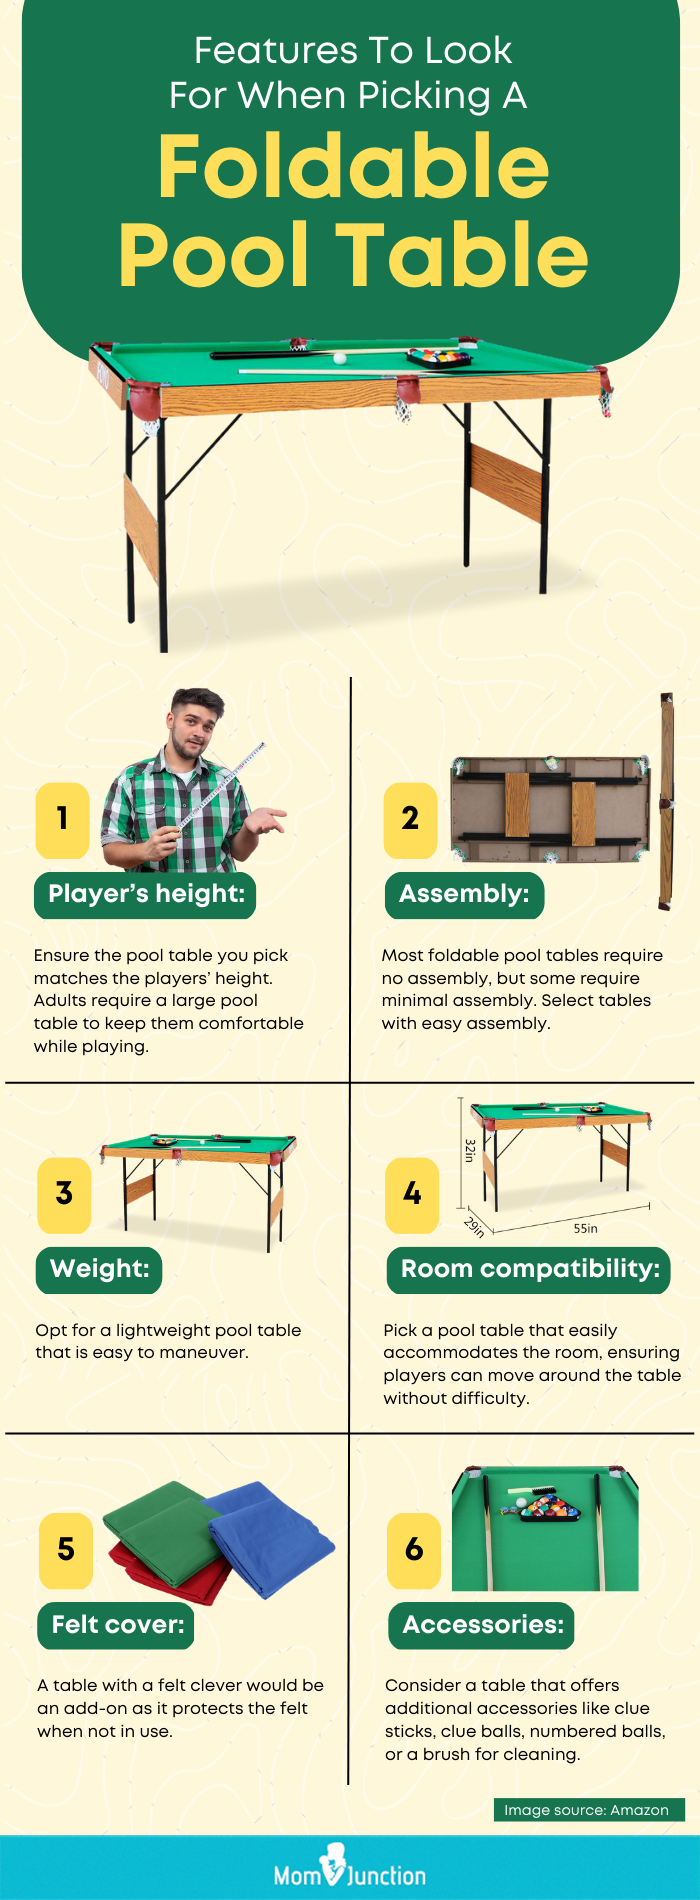 Features To Look For When Picking A Foldable Pool Table